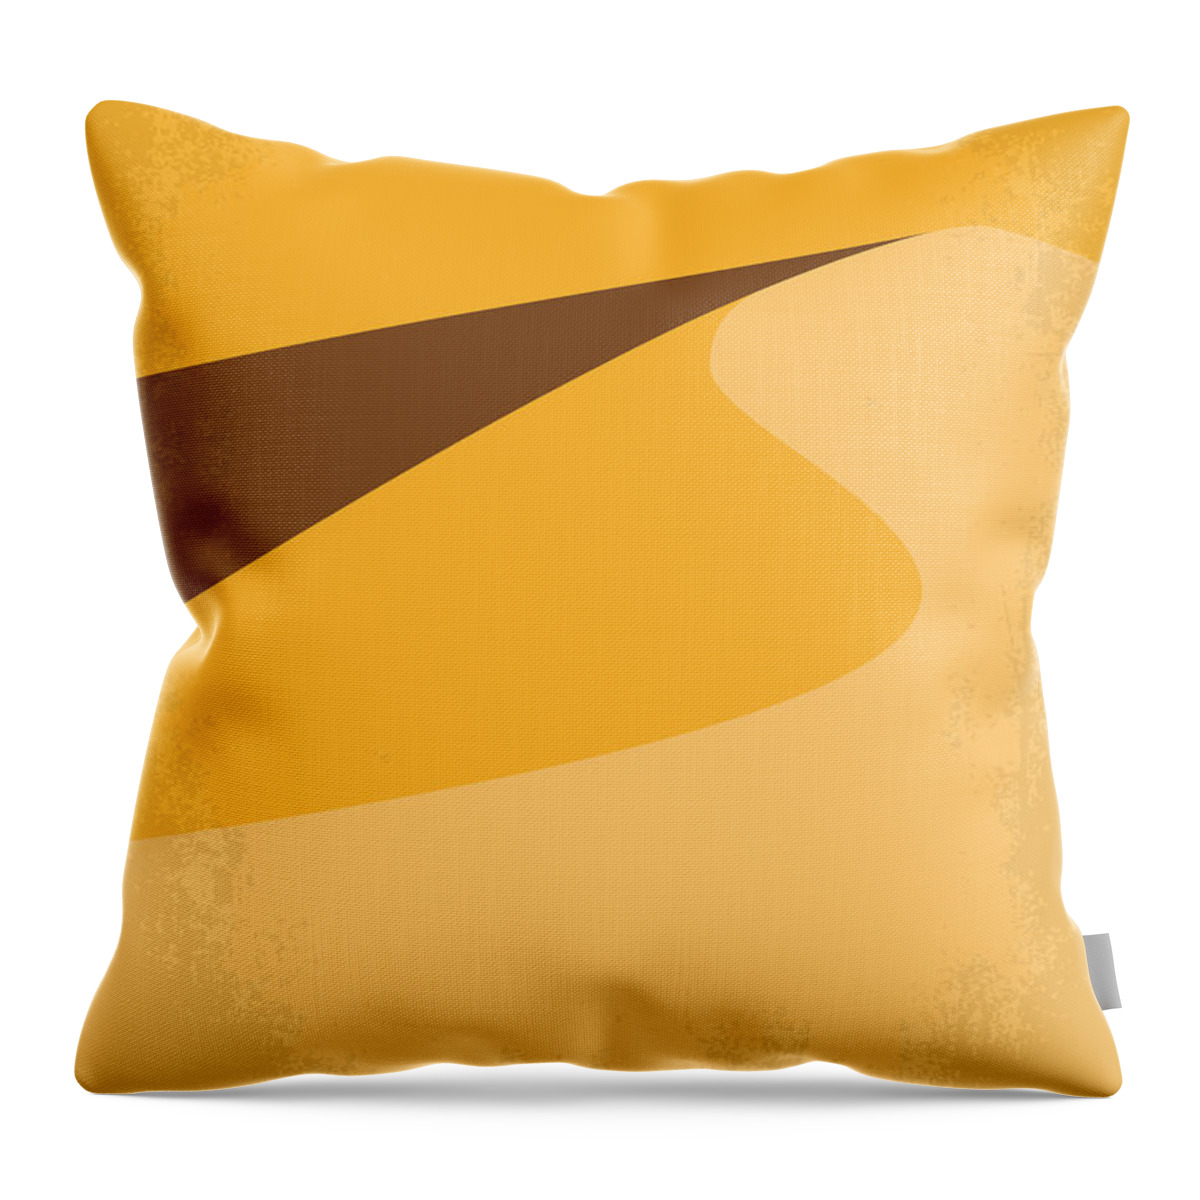 Dune Throw Pillow featuring the digital art No251 My DUNE minimal movie poster by Chungkong Art